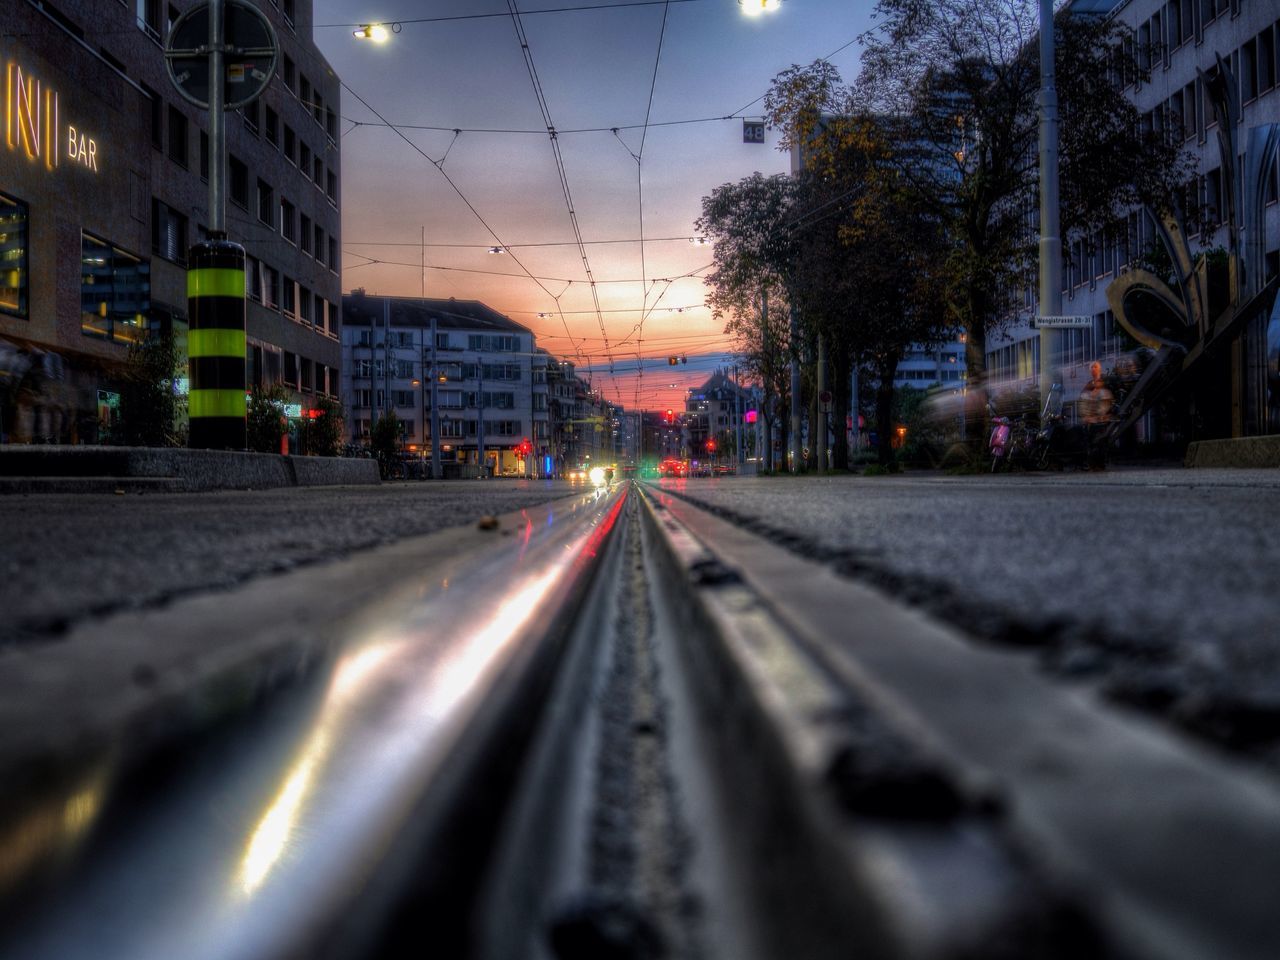 transportation, railroad track, the way forward, surface level, diminishing perspective, rail transportation, vanishing point, building exterior, built structure, sky, architecture, road, street, public transportation, outdoors, city, mode of transport, long, no people, selective focus